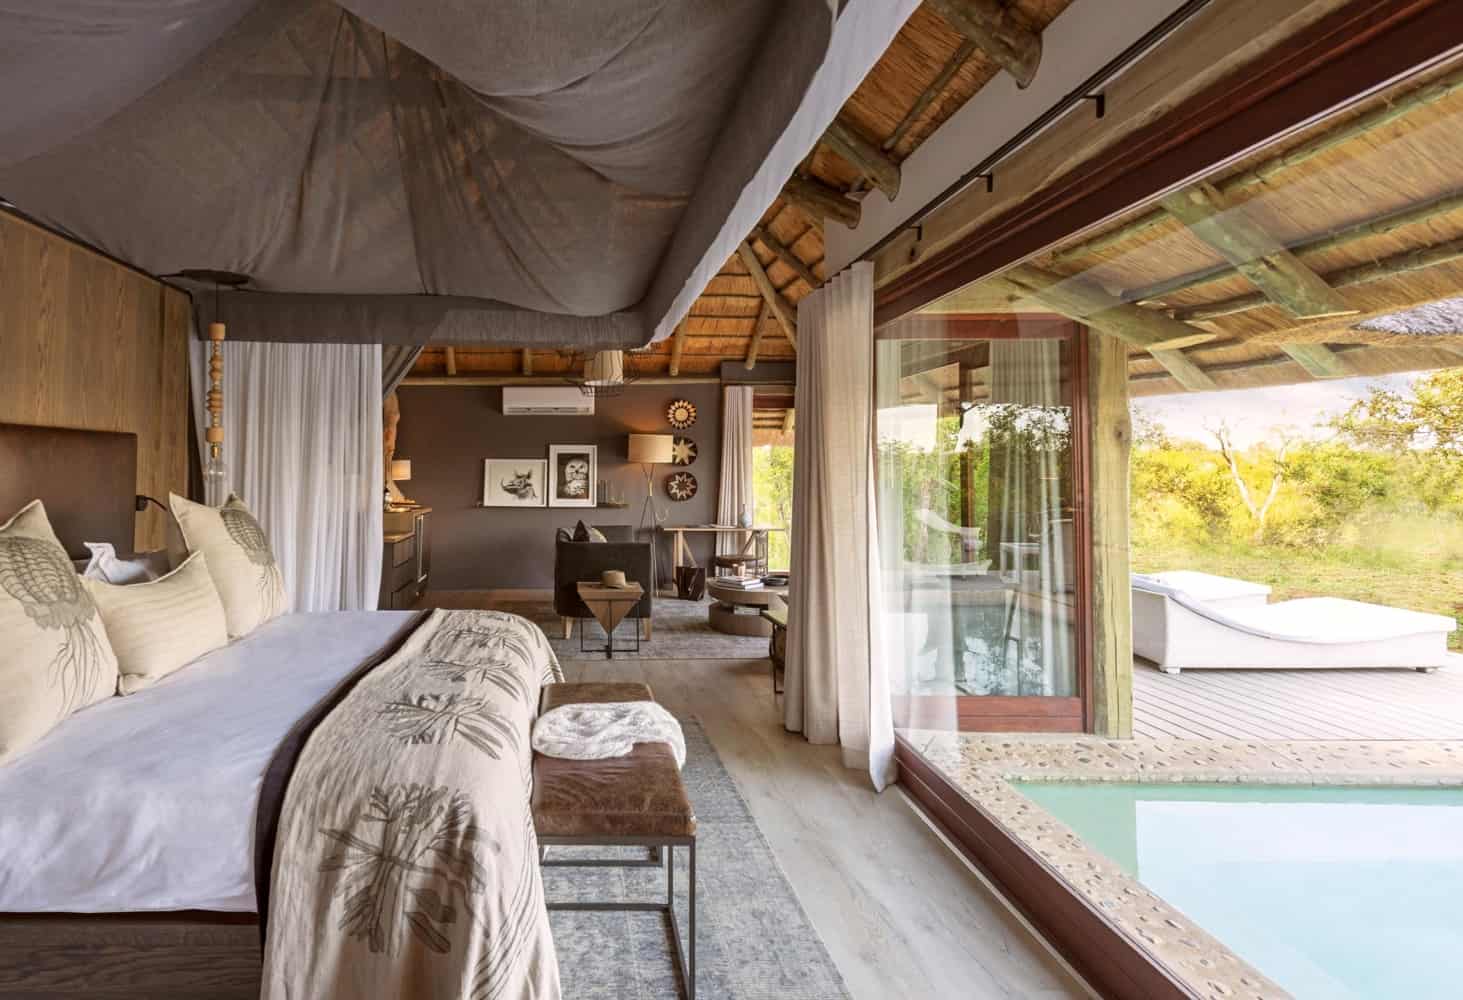 STAYCATION SAFARI DEALS THAT WILL MAKE YOU SWOON